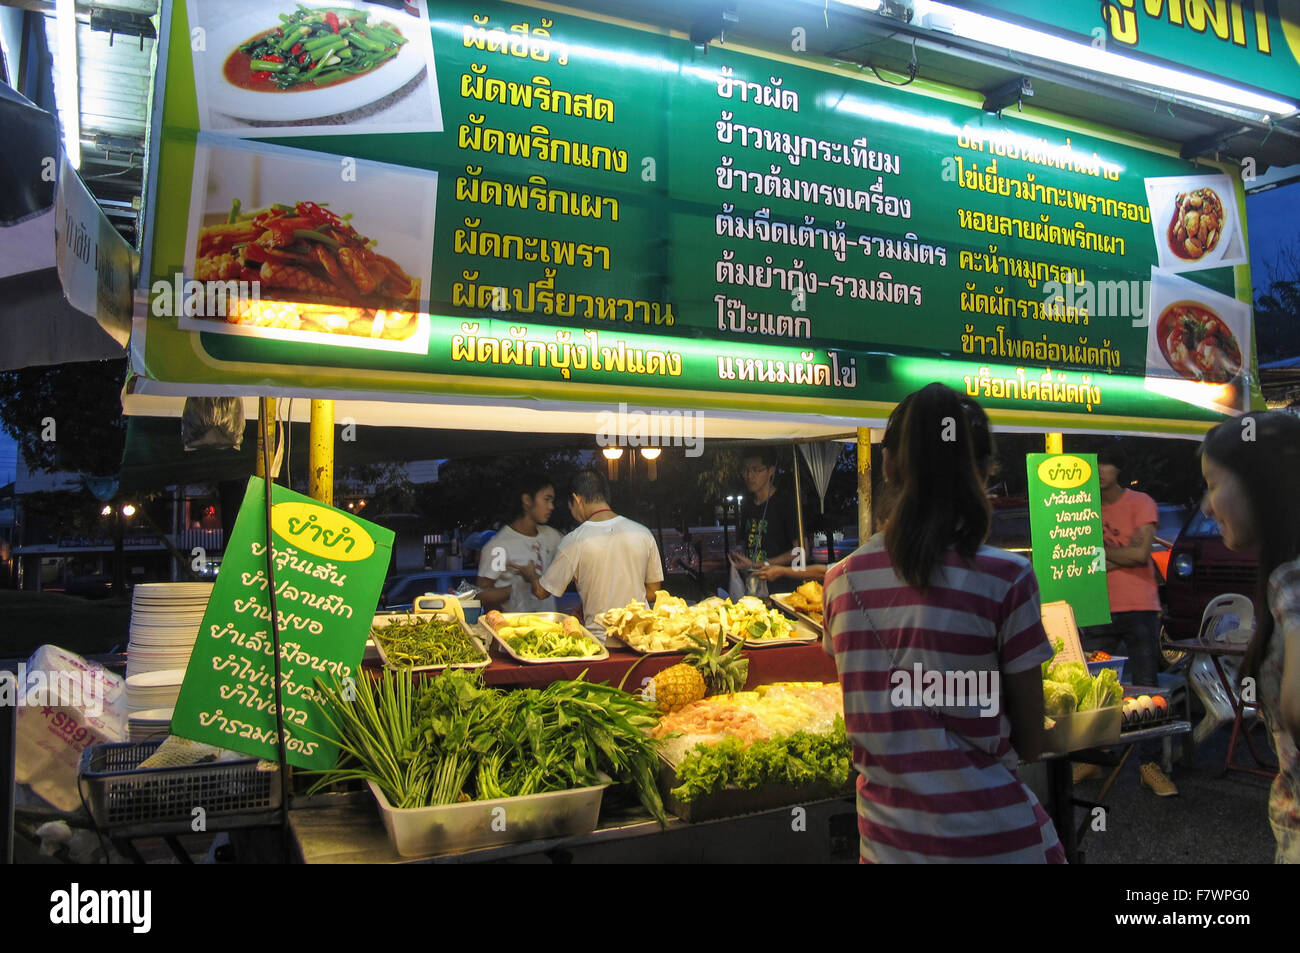 Cooked Food Stall in Chang Puak Gate, Chiang Mai, Thailand Stock Photo